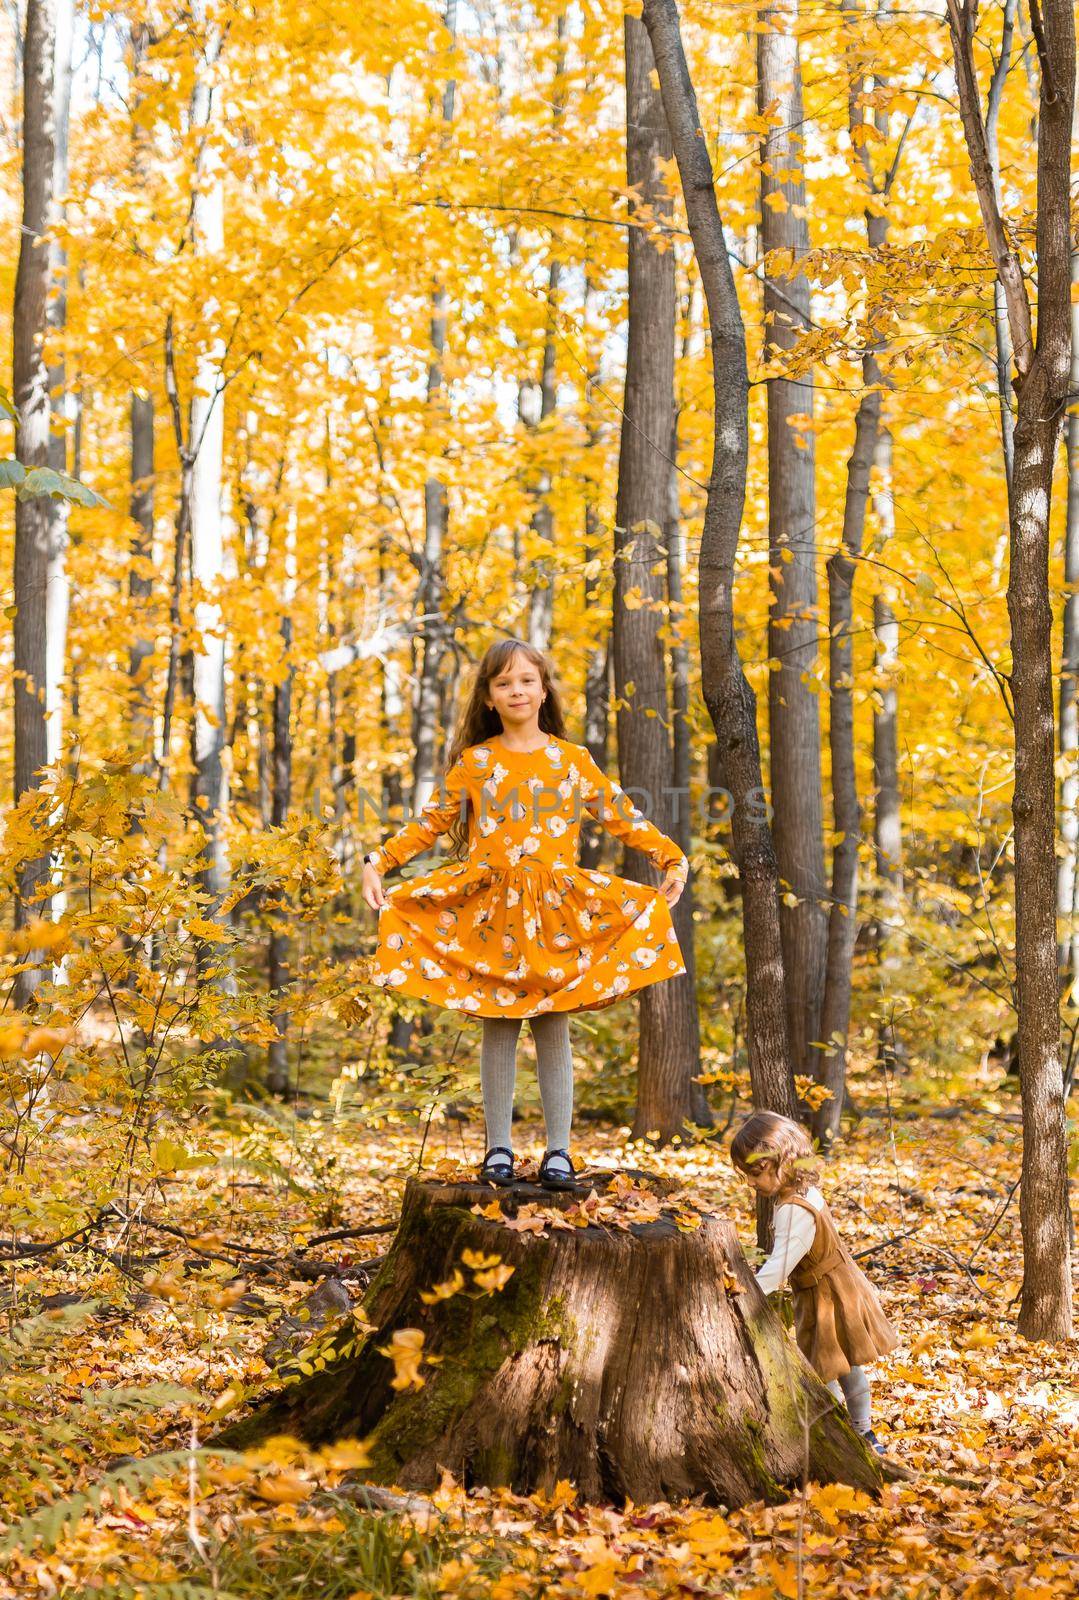 Little kid girl with autumn orange leaves in a park. Lifestyle, fall season and children concept. by Satura86